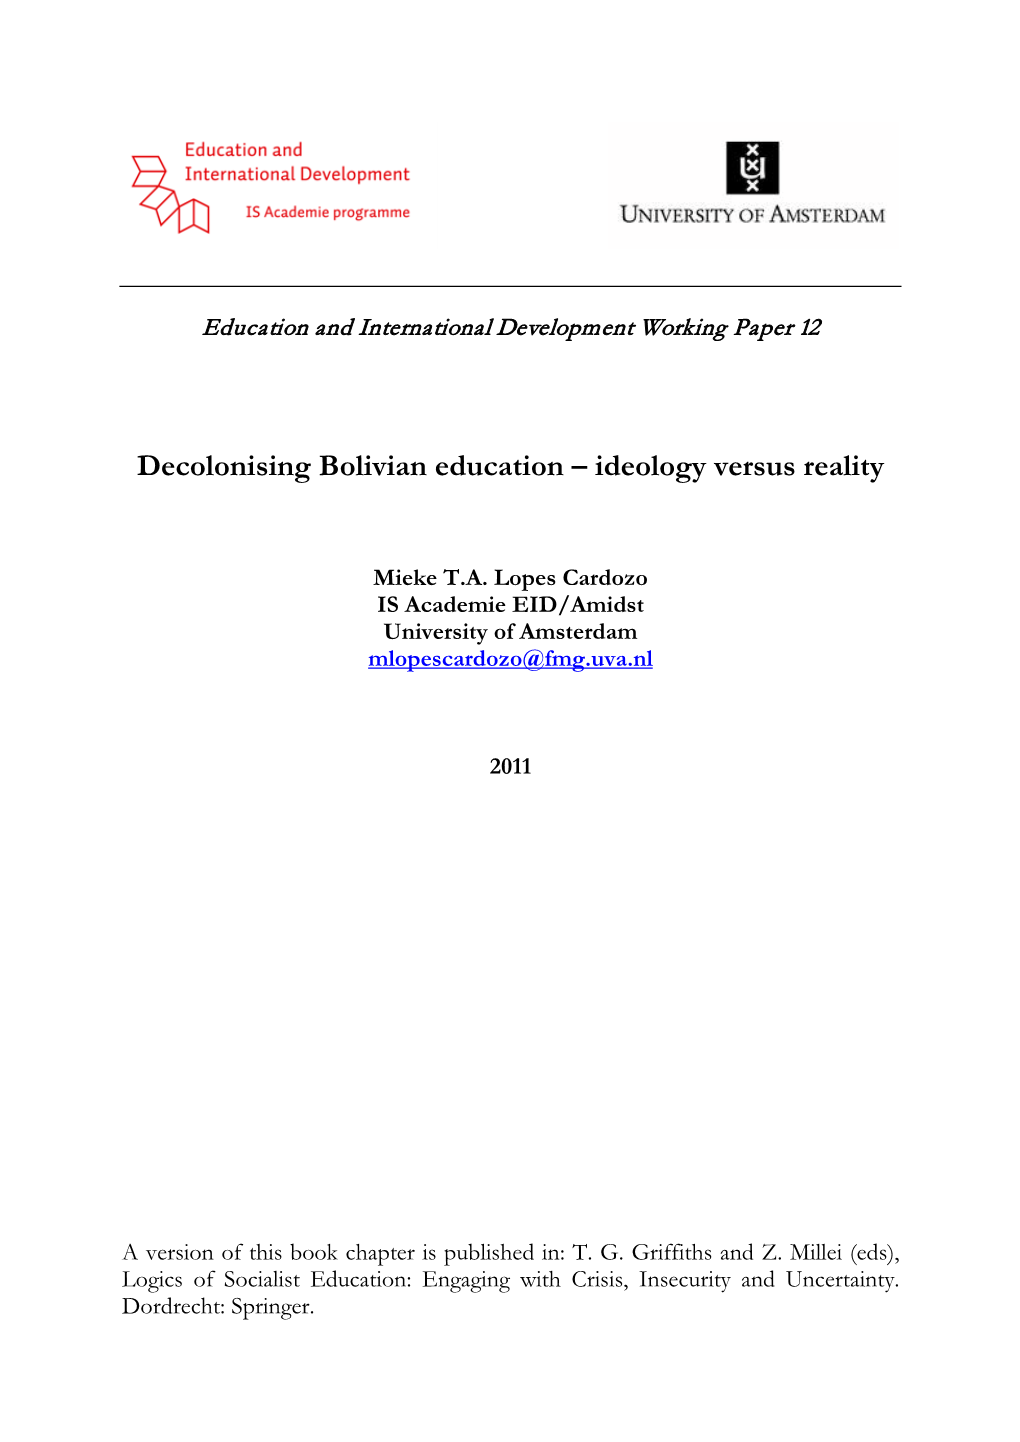 Decolonising Bolivian Education – Ideology Versus Reality